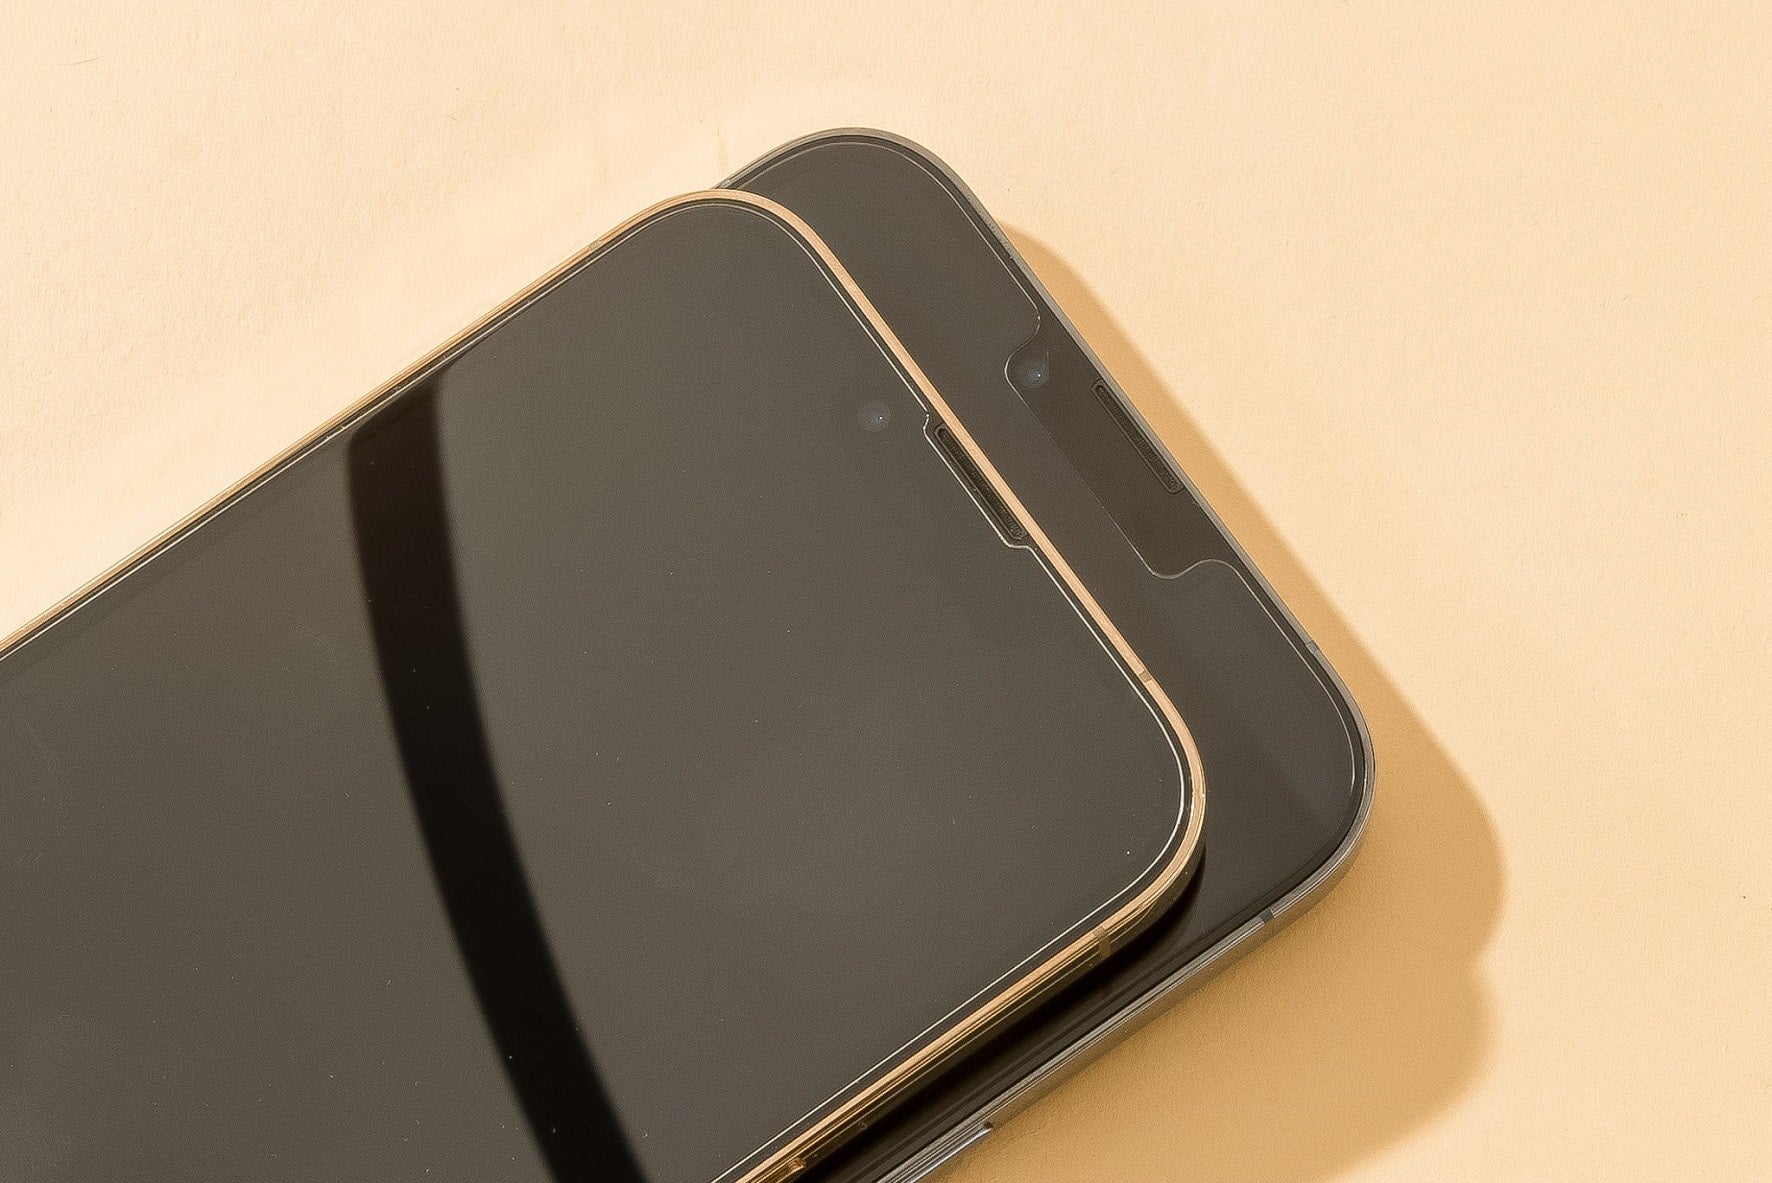 5 Important Reasons You Should Put a Screen Protector on Your Smartphone